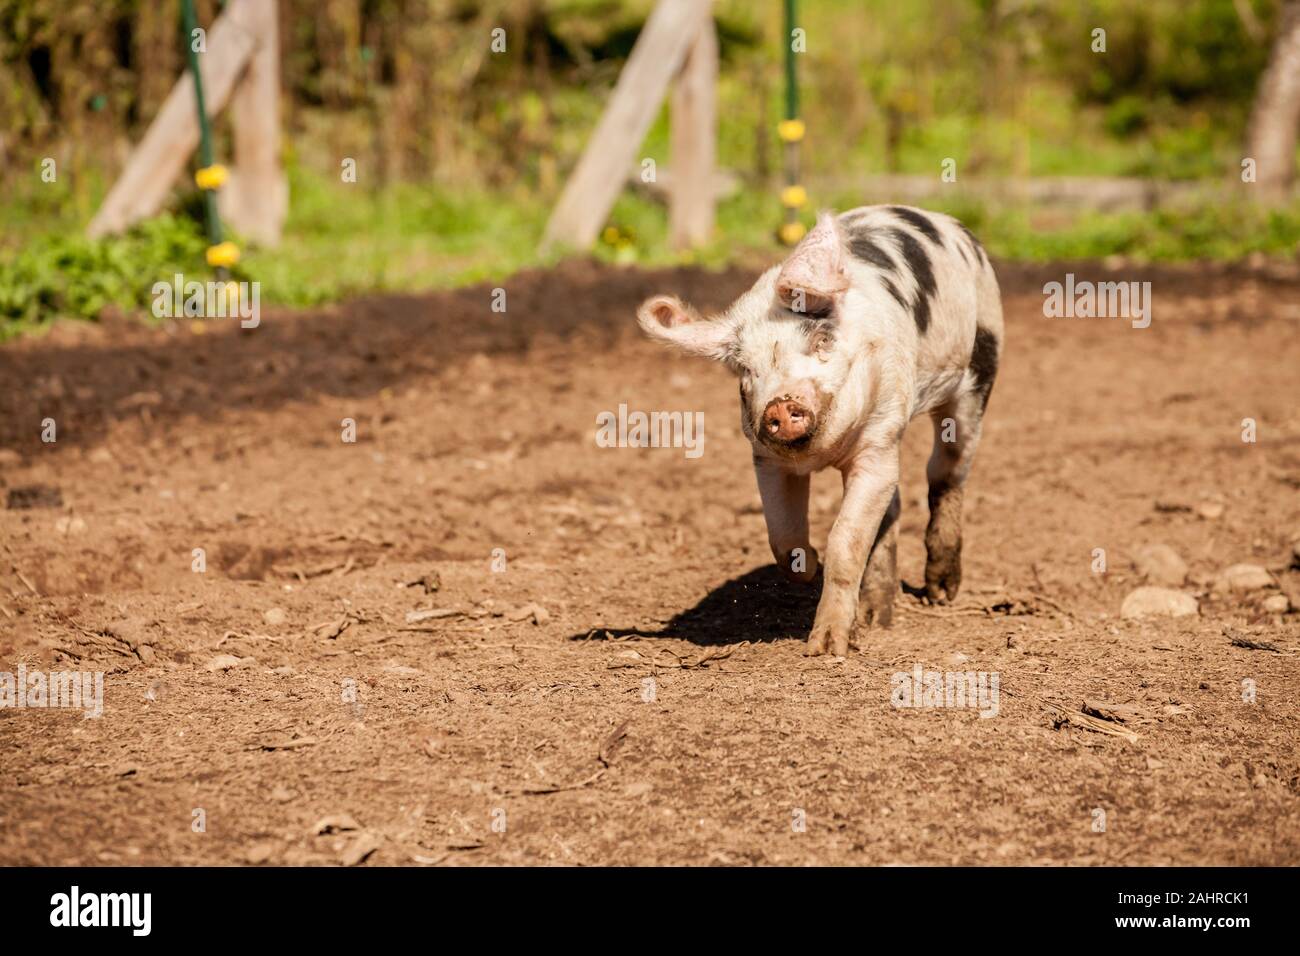 Gloucestershire Old Spots pig running in western Washington, USA Stock Photo